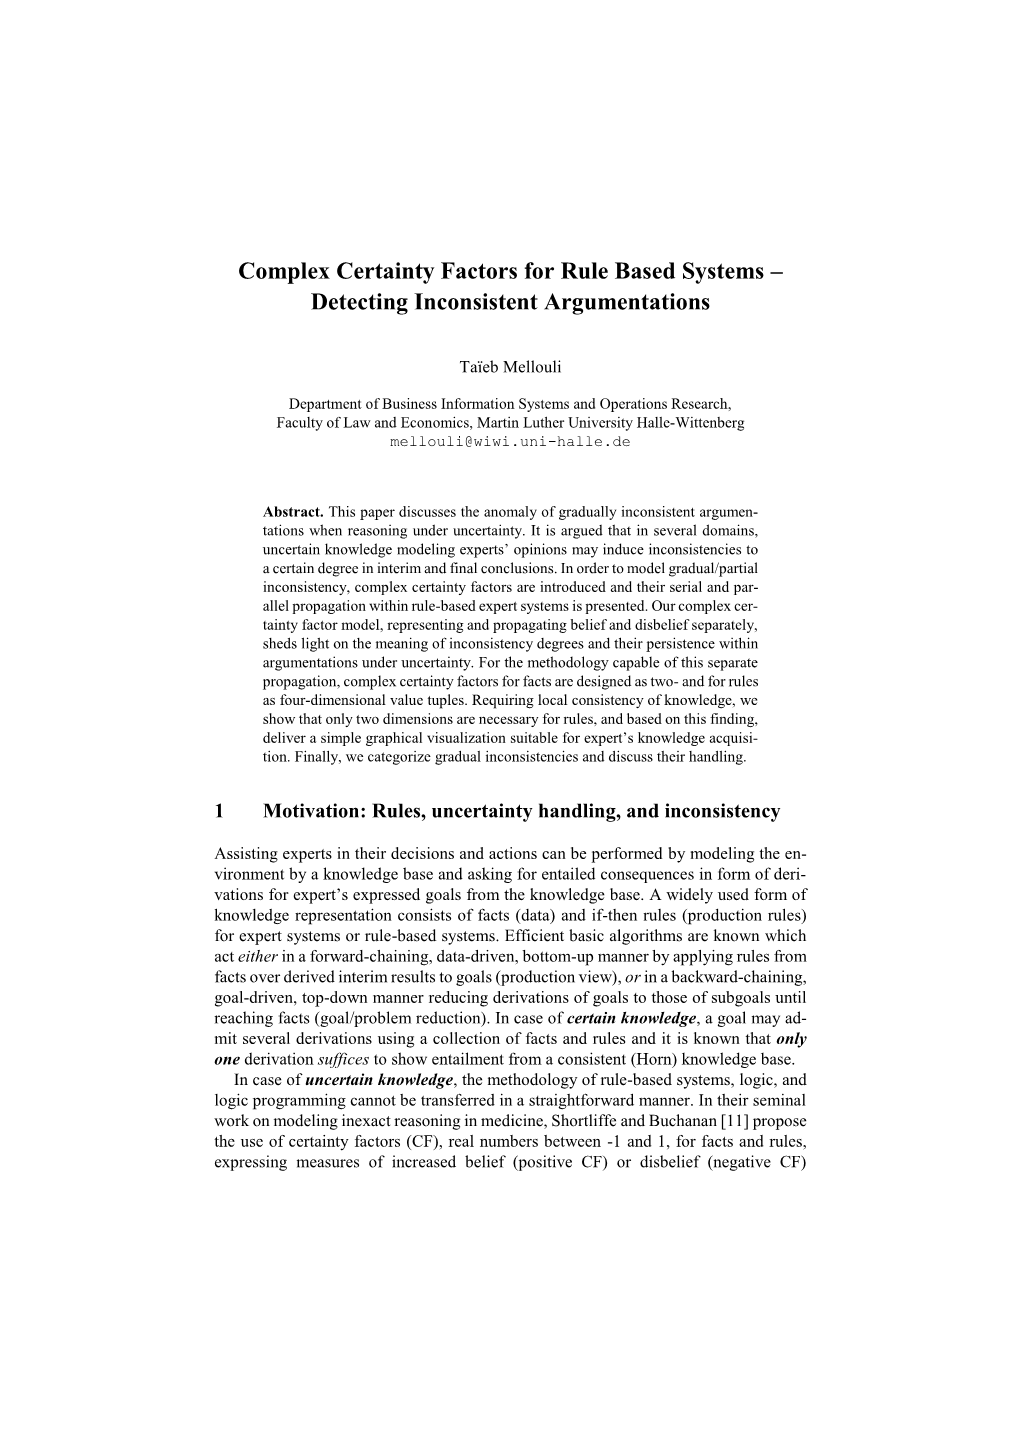 Complex Certainty Factors for Rule Based Systems – Detecting Inconsistent Argumentations